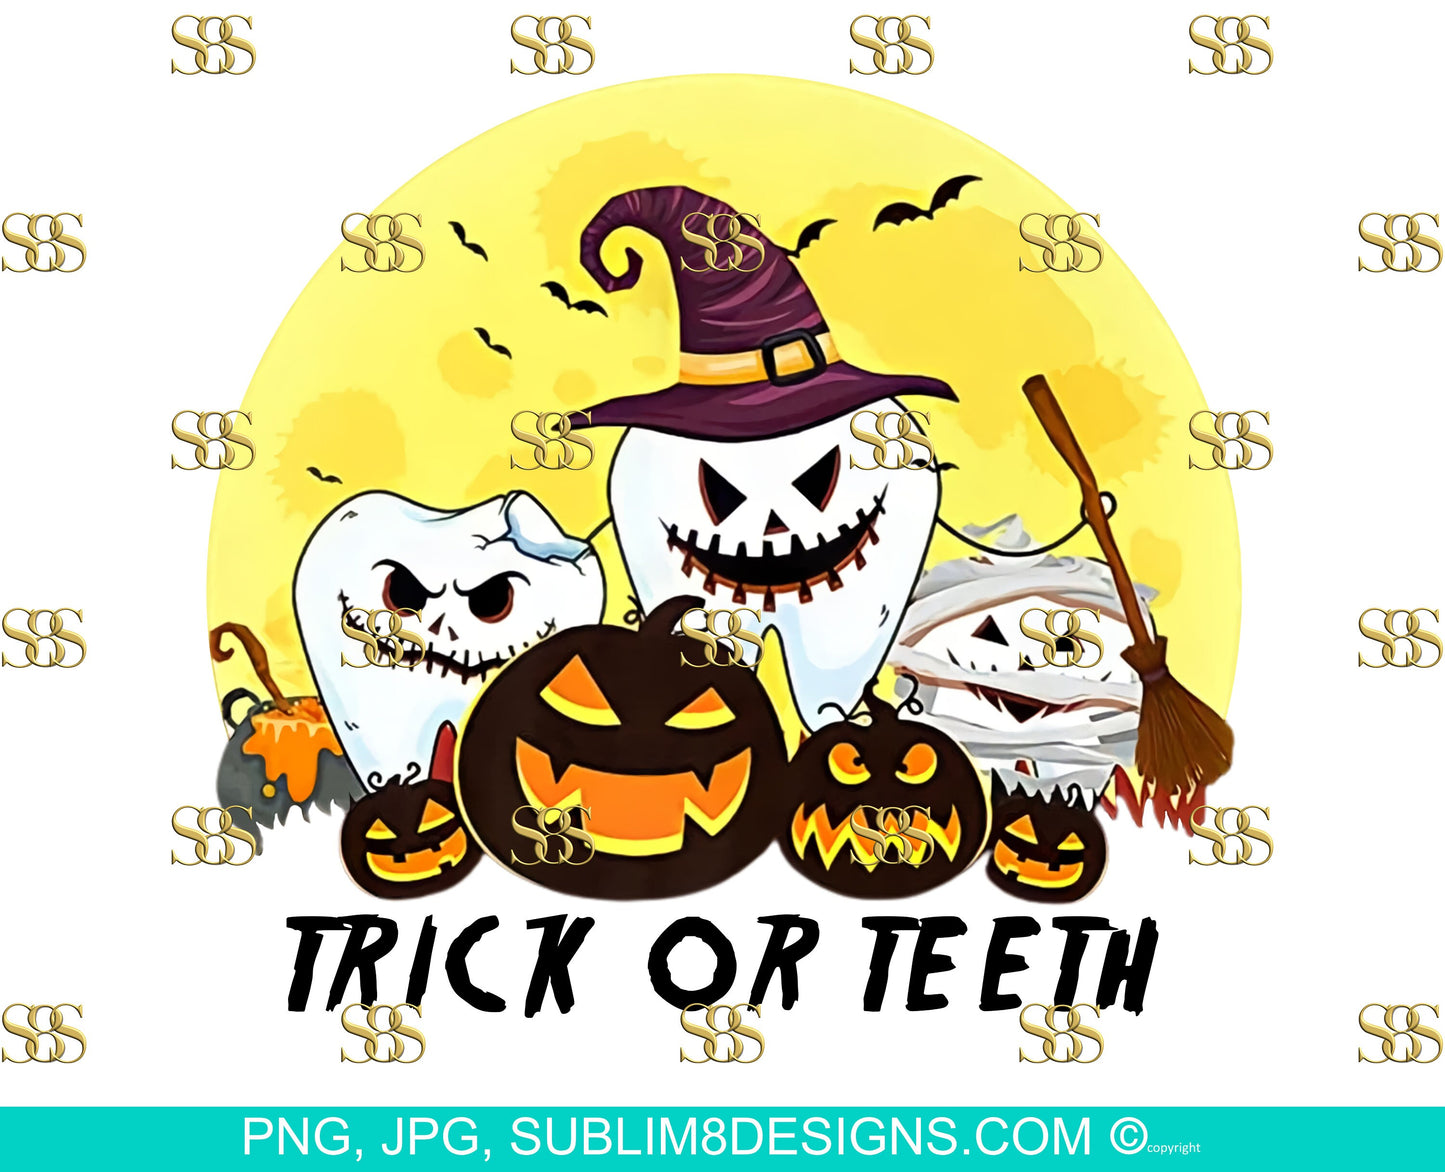 Trick or Teeth PNG and JPG ONLY